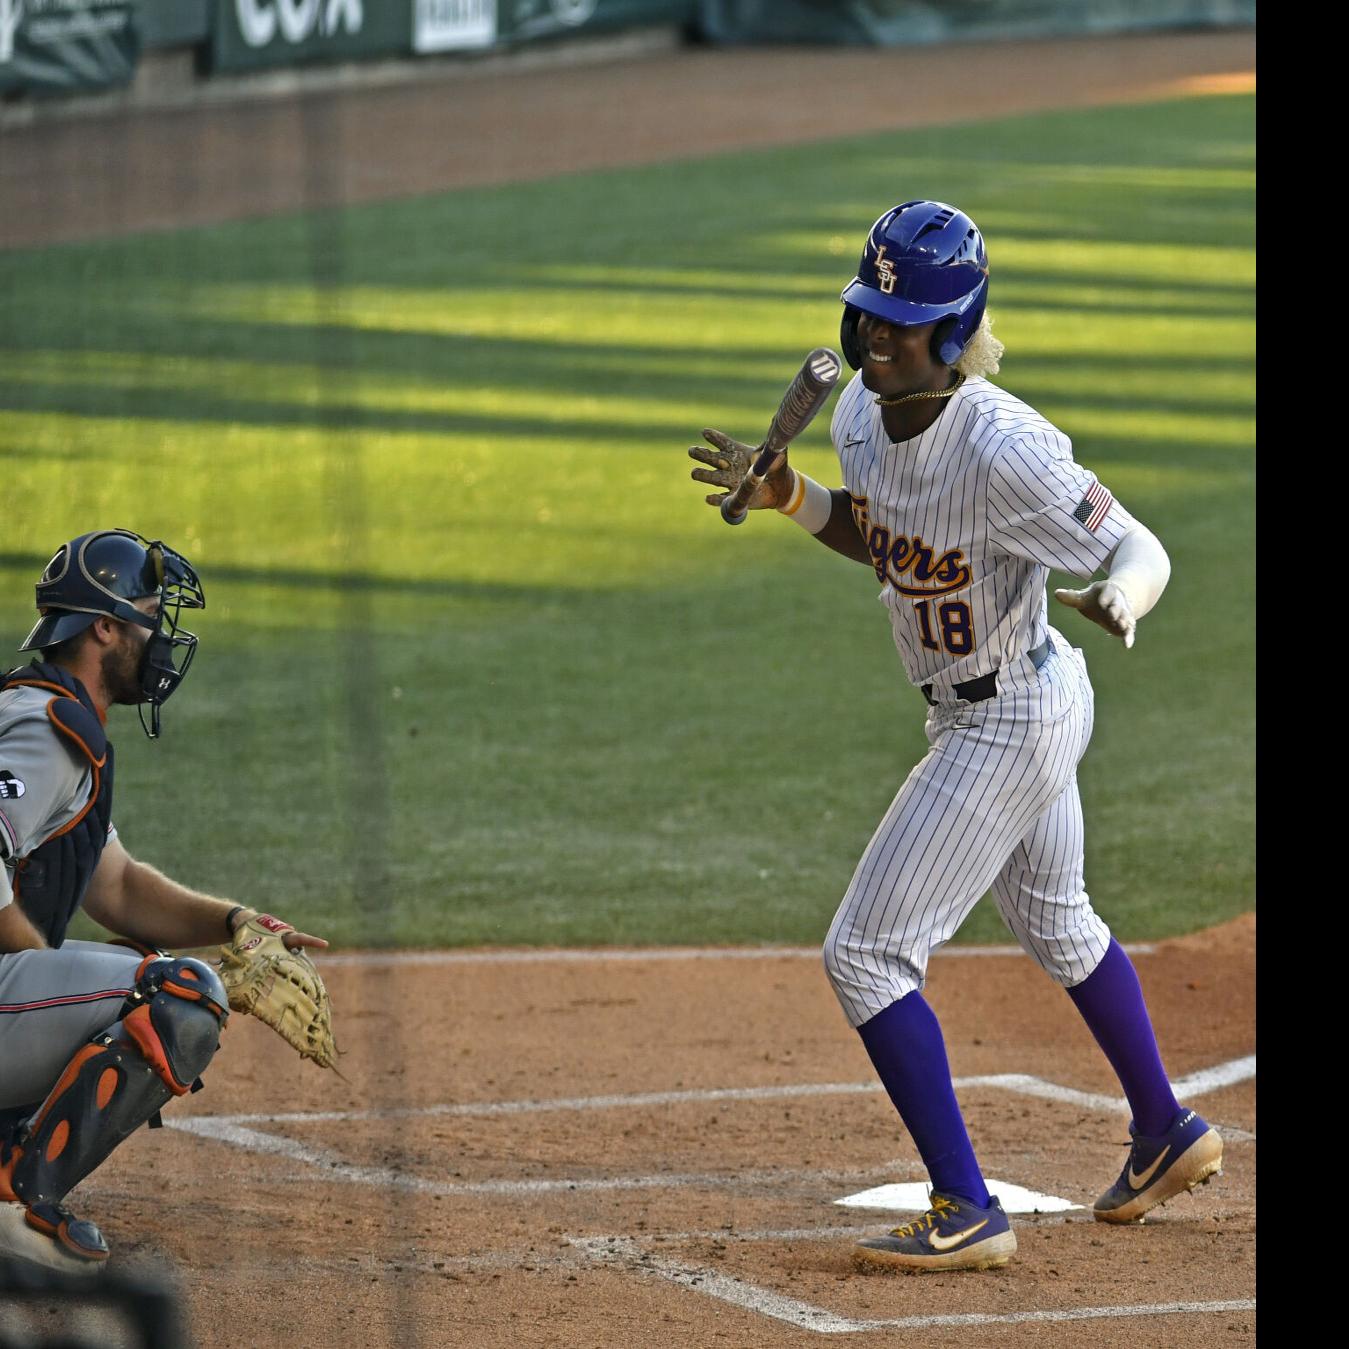 LSU Drops Third Straight Series Opener, Lose to Auburn 6-5 - And